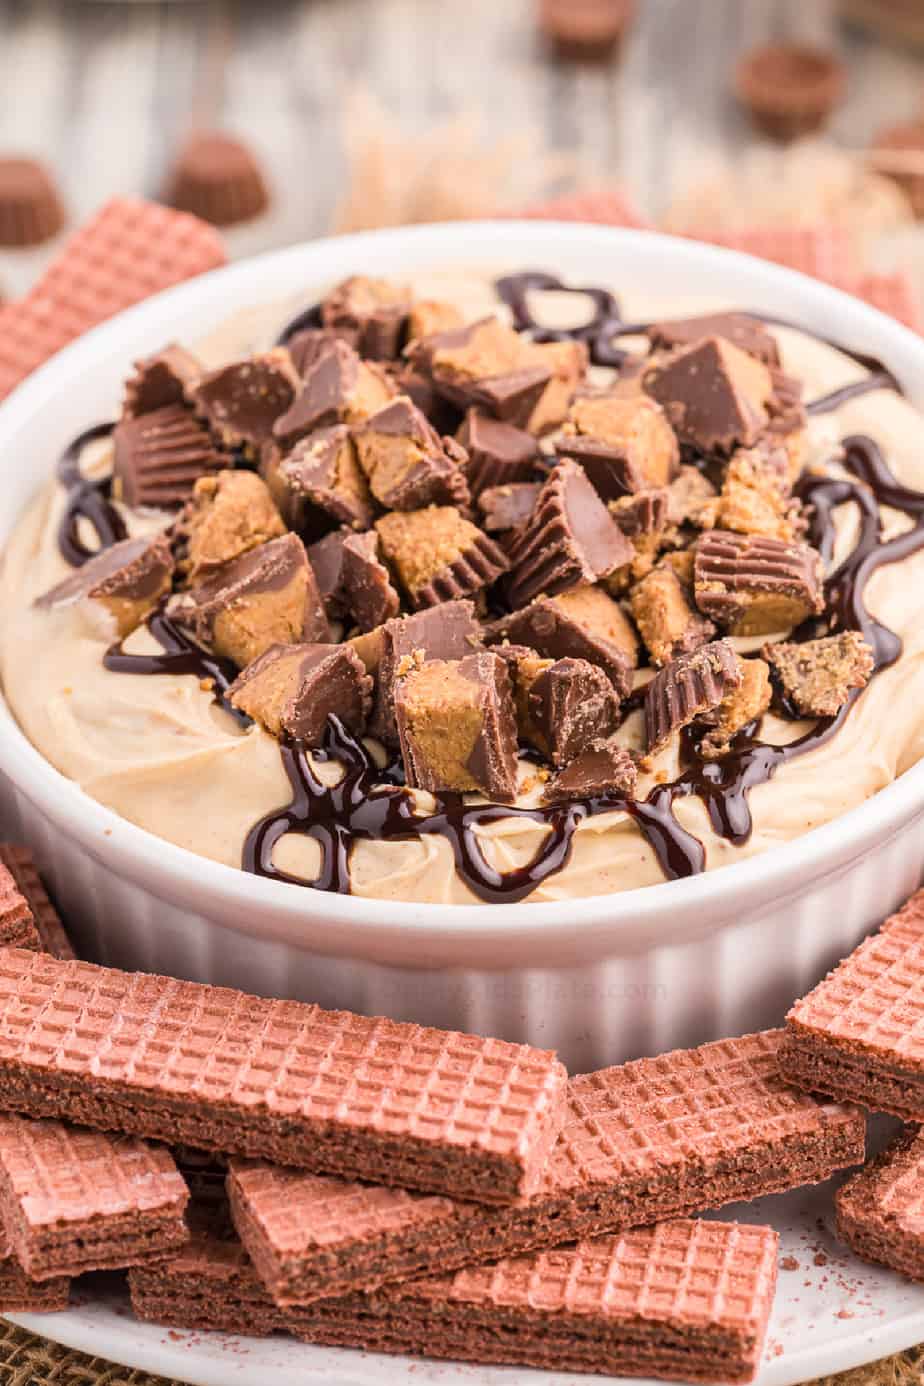 Cheesecake dip in a bowl covered in chocolate syrup and chopped peanut butter cup with cookies on a platters